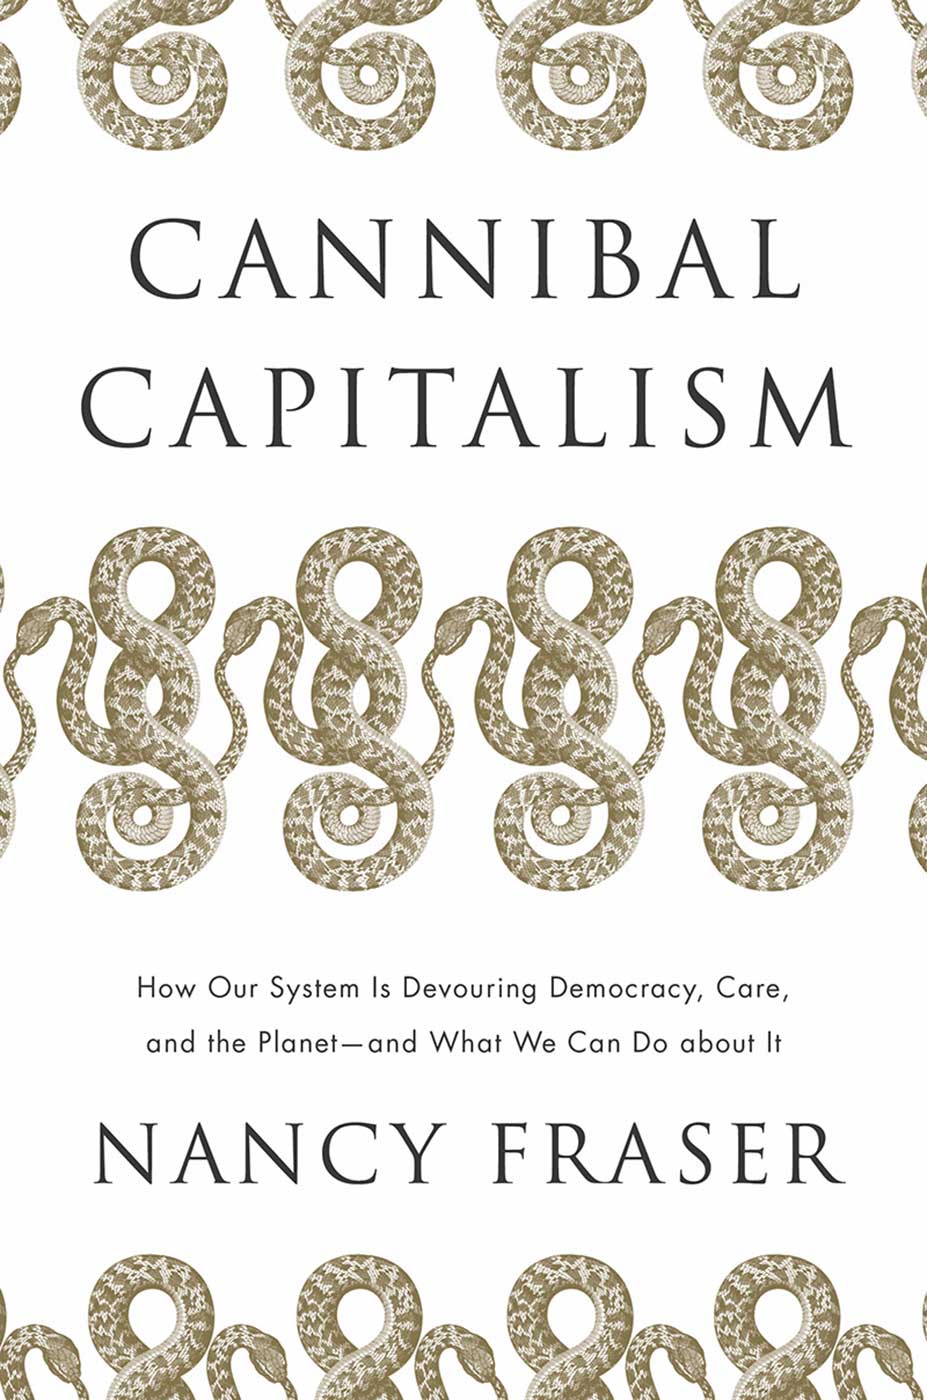 Book cover of Cannibal Capitalism by Nancy Fraser. White background and a repeated image of a gold ouroboros.